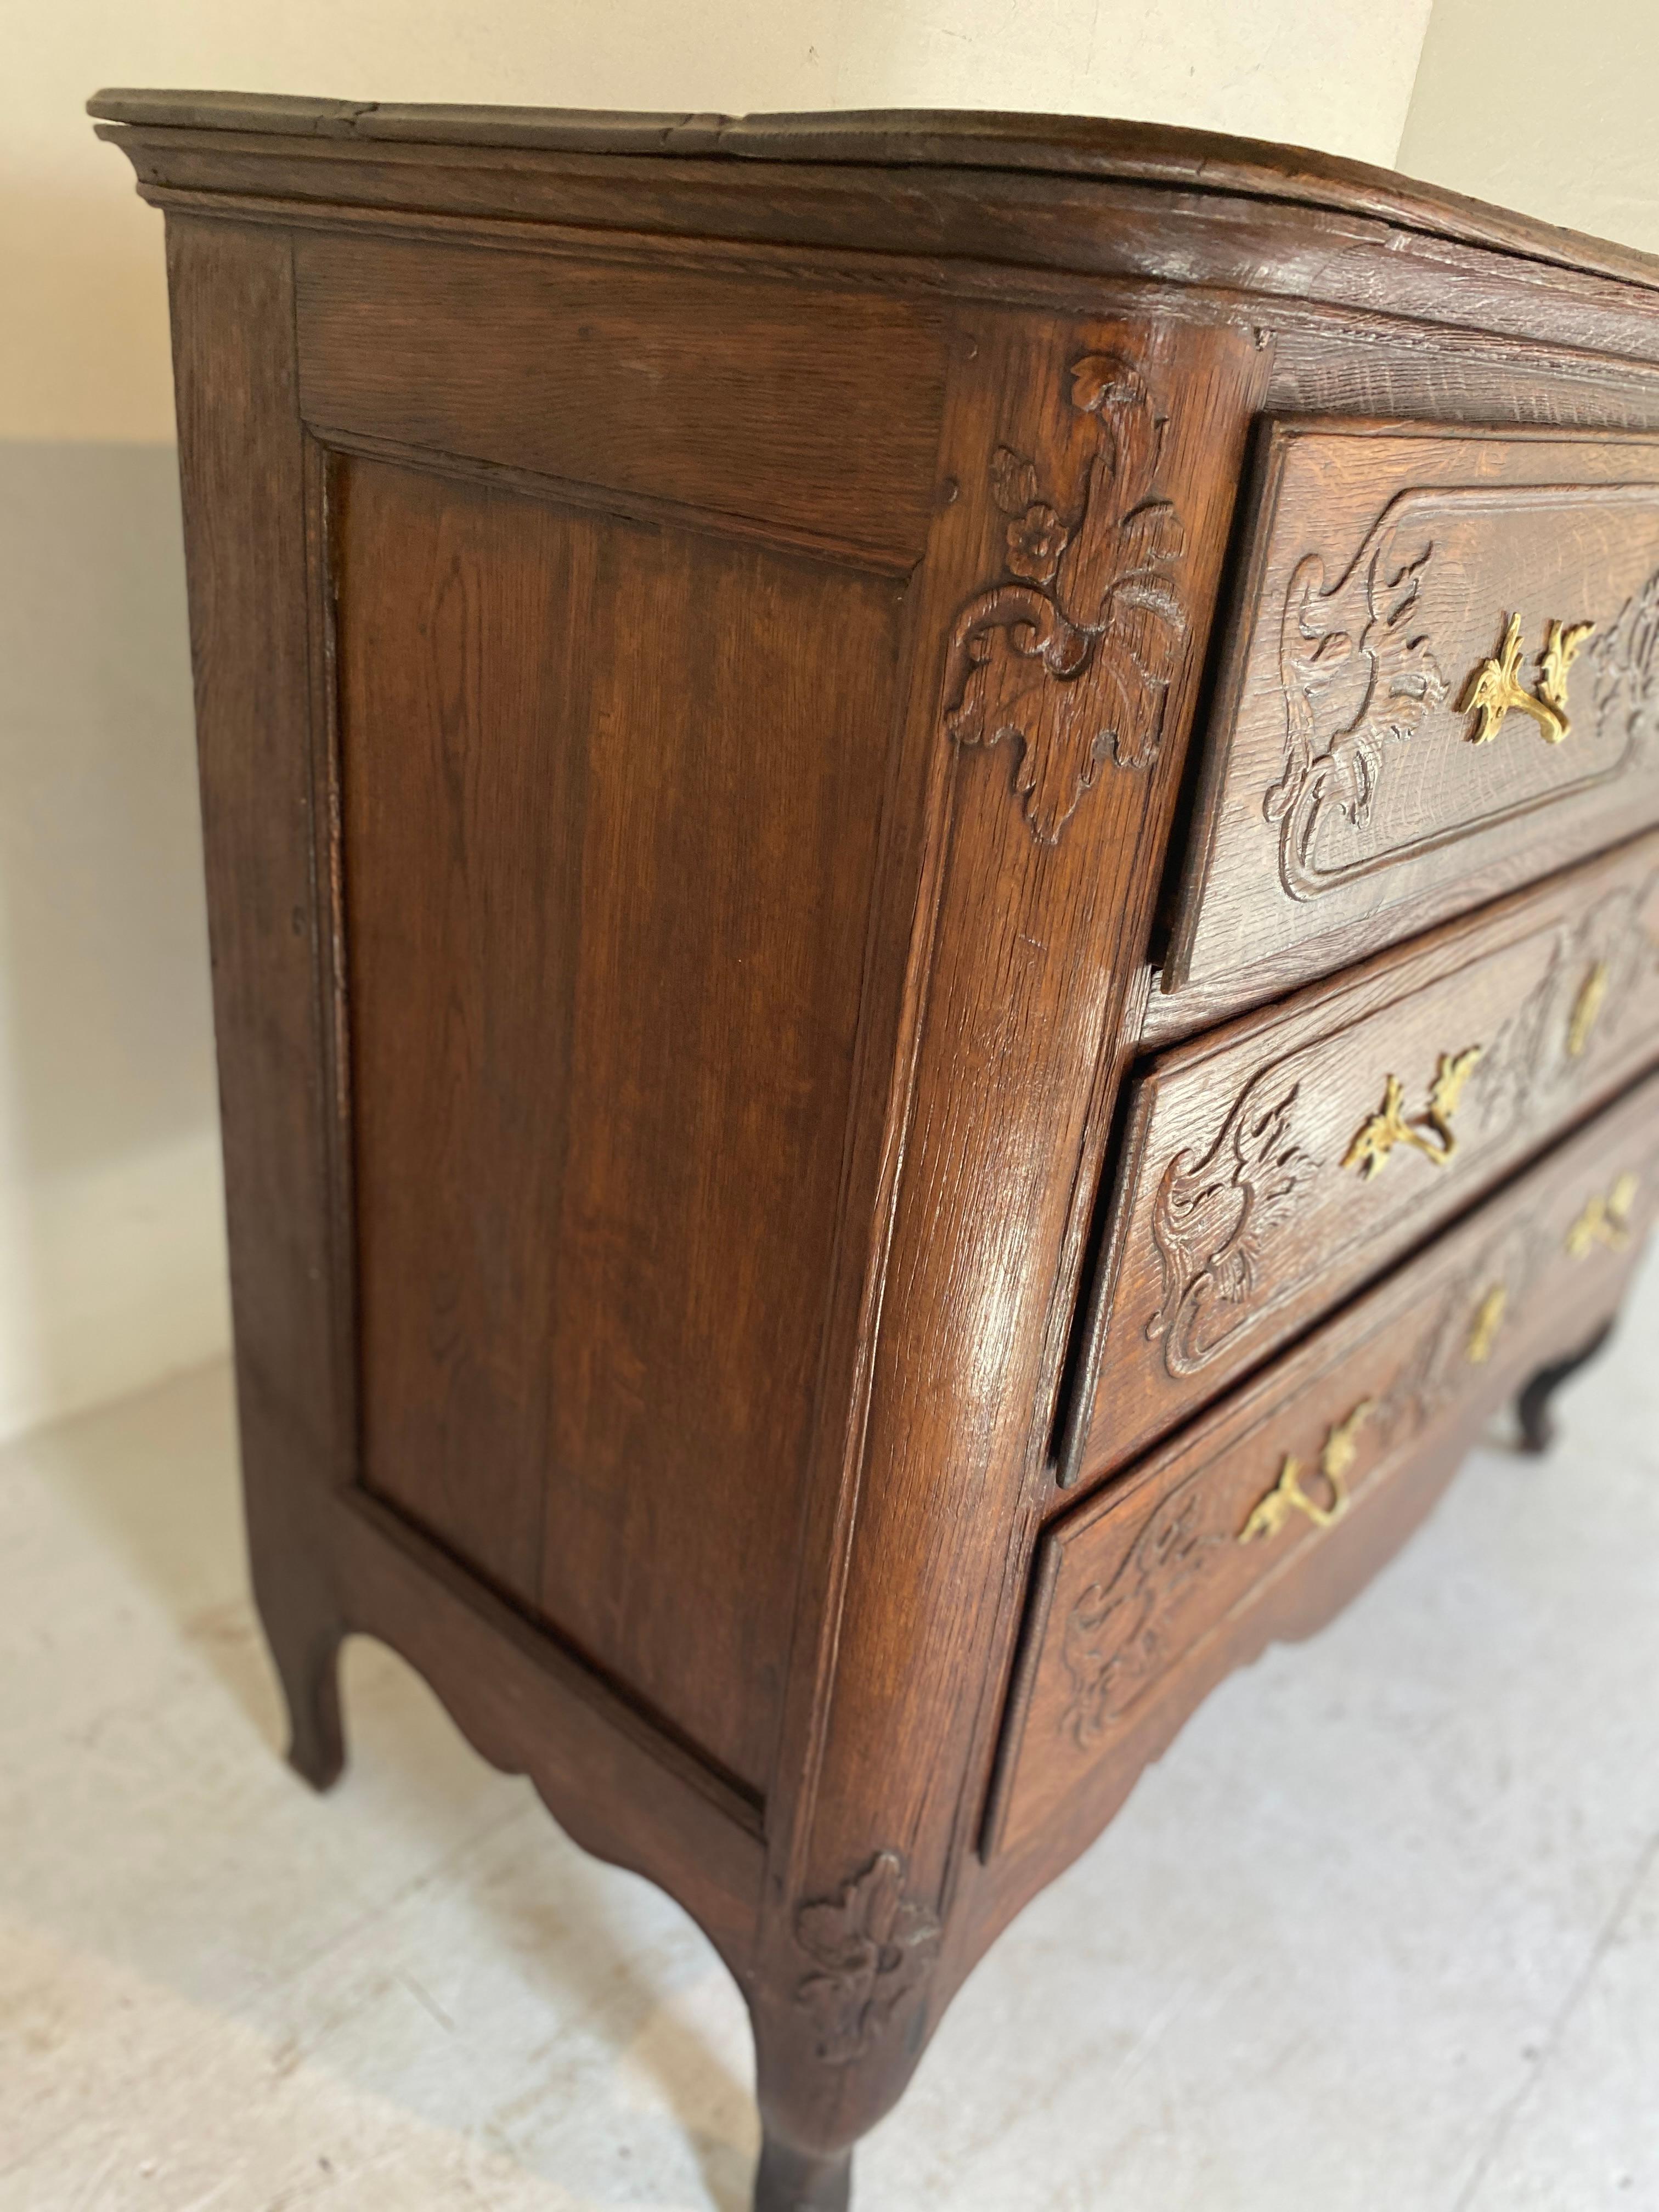 very beautiful little chest of drawers from the 19th century in oak from cork, composed of 3 beautifully carved drawers superb chest of drawers in perfect condition